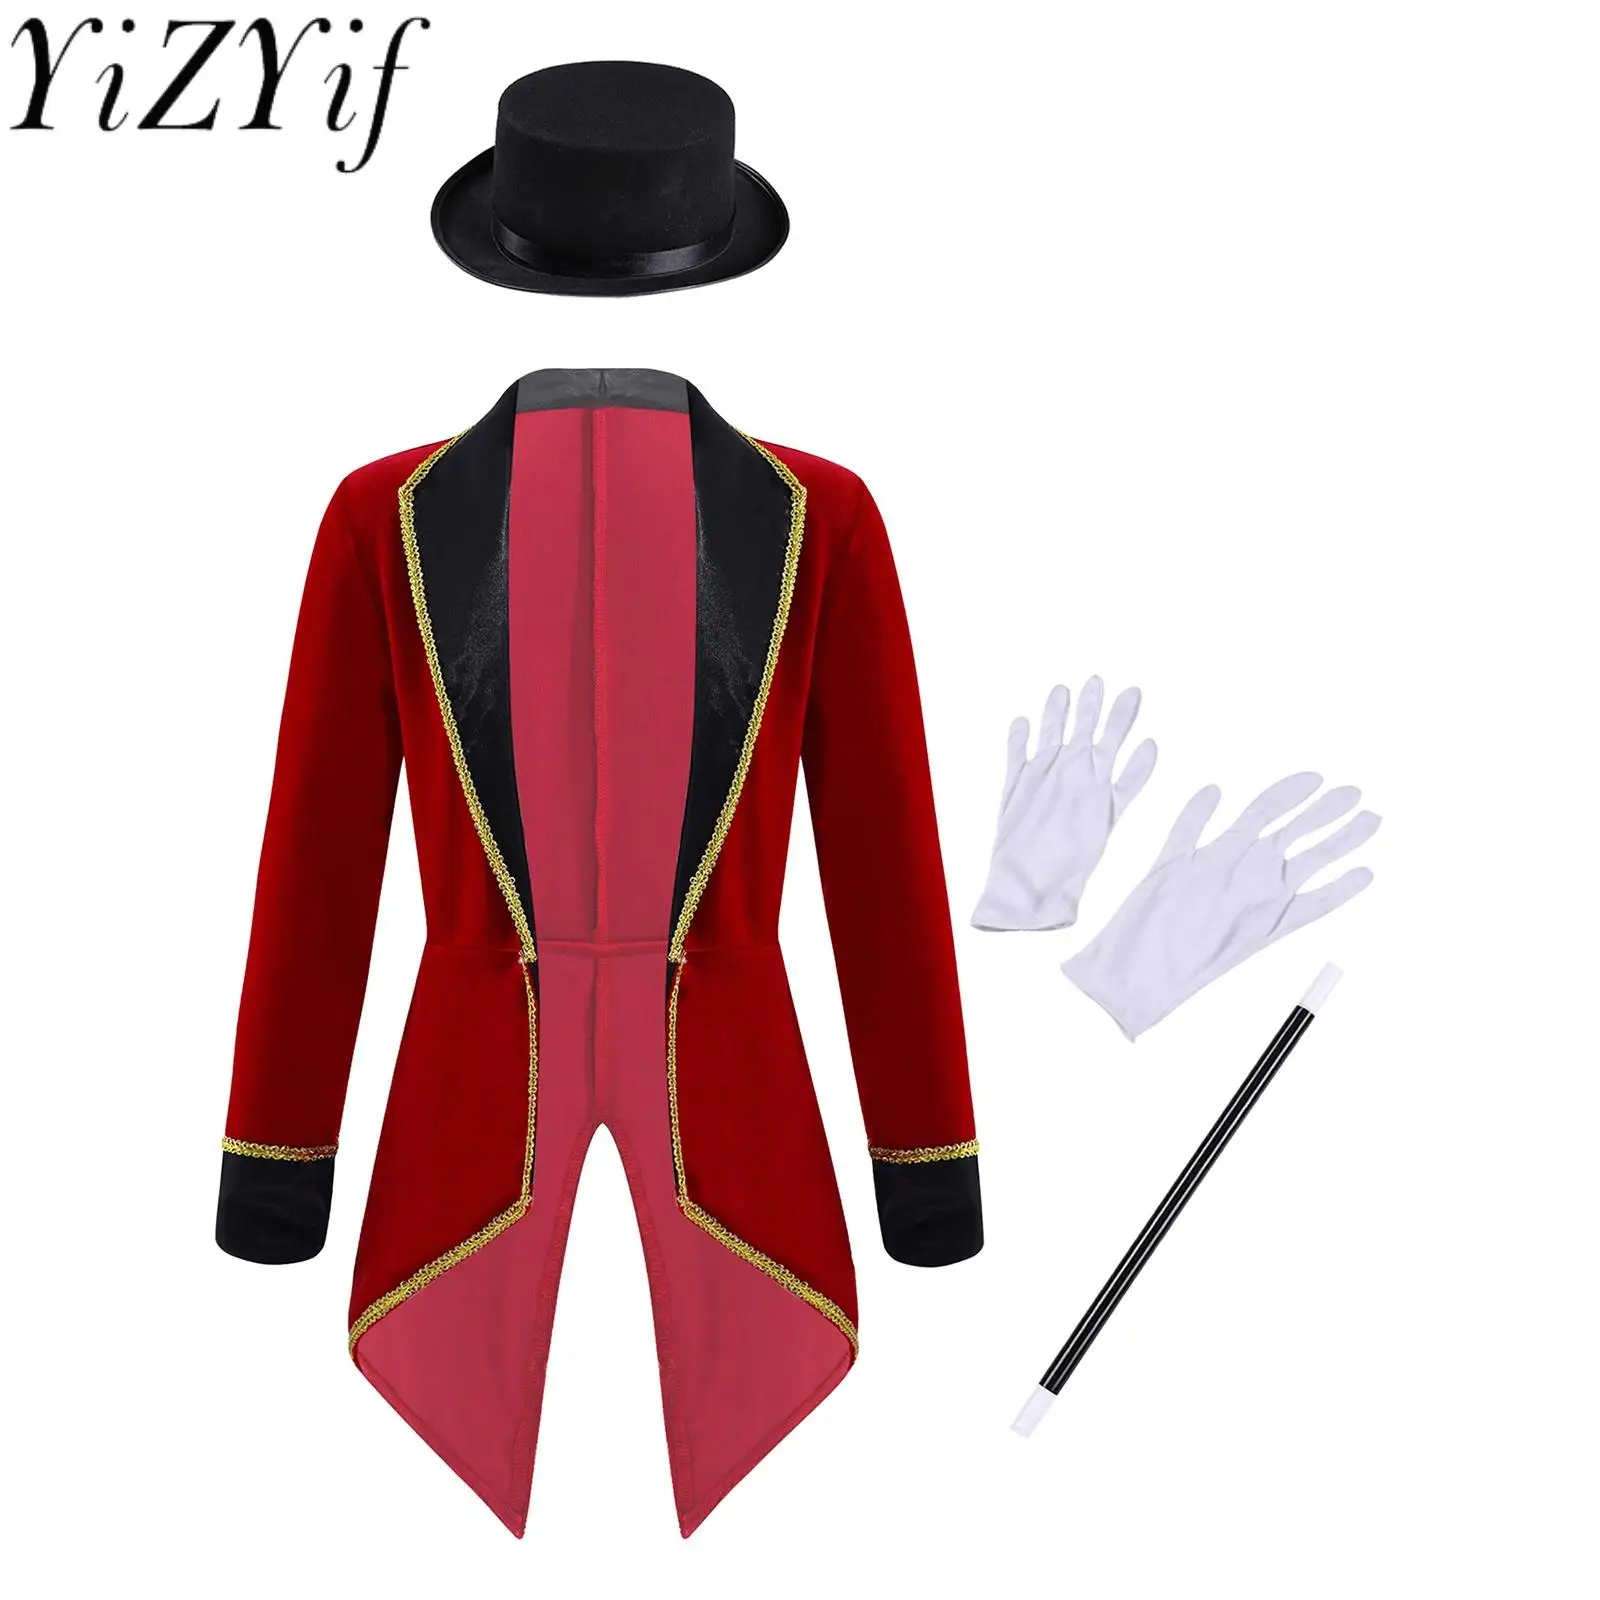 

Kids Halloween Circus Ringmaster Tuxedo Coat Long Sleeves Tailcoat Jacket with Hat Magic Wand Gloves Performance Cosplay Suit